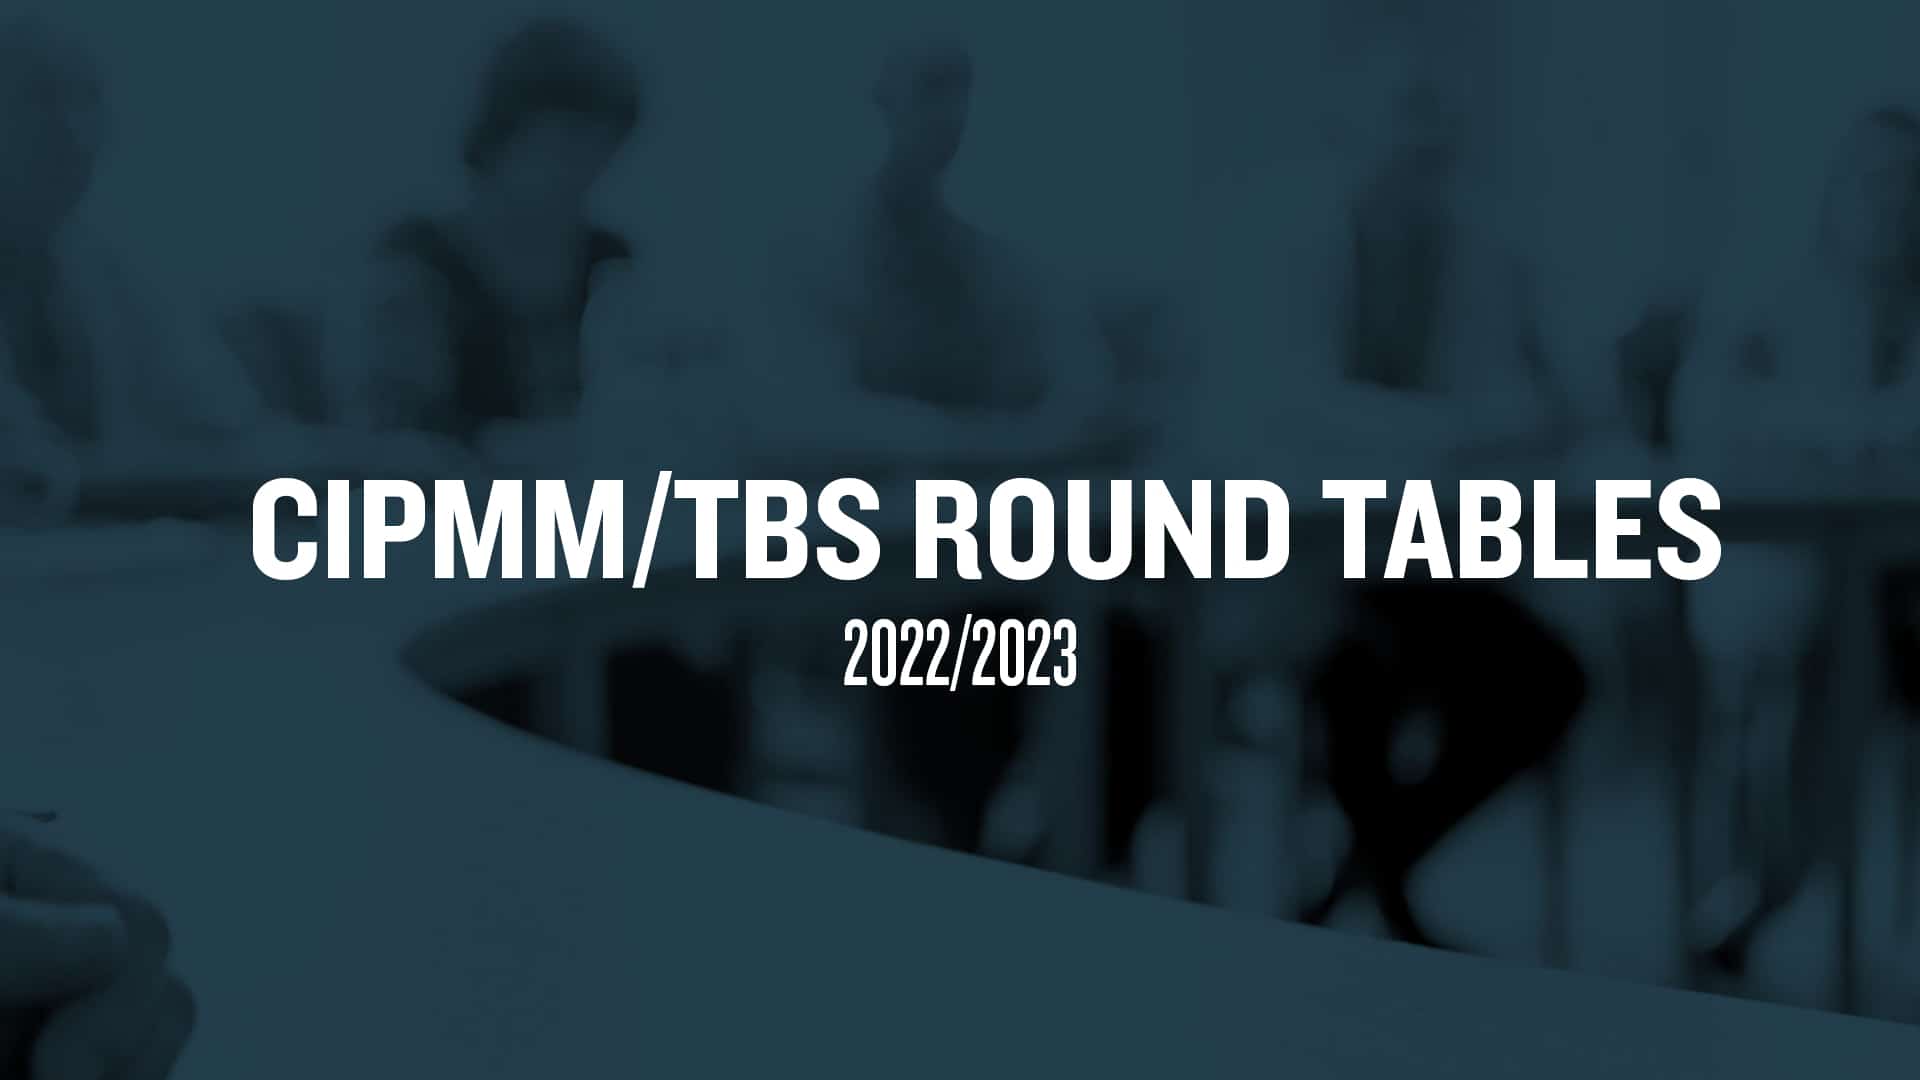 CIPMM/TBS Round Tables 2022-2023